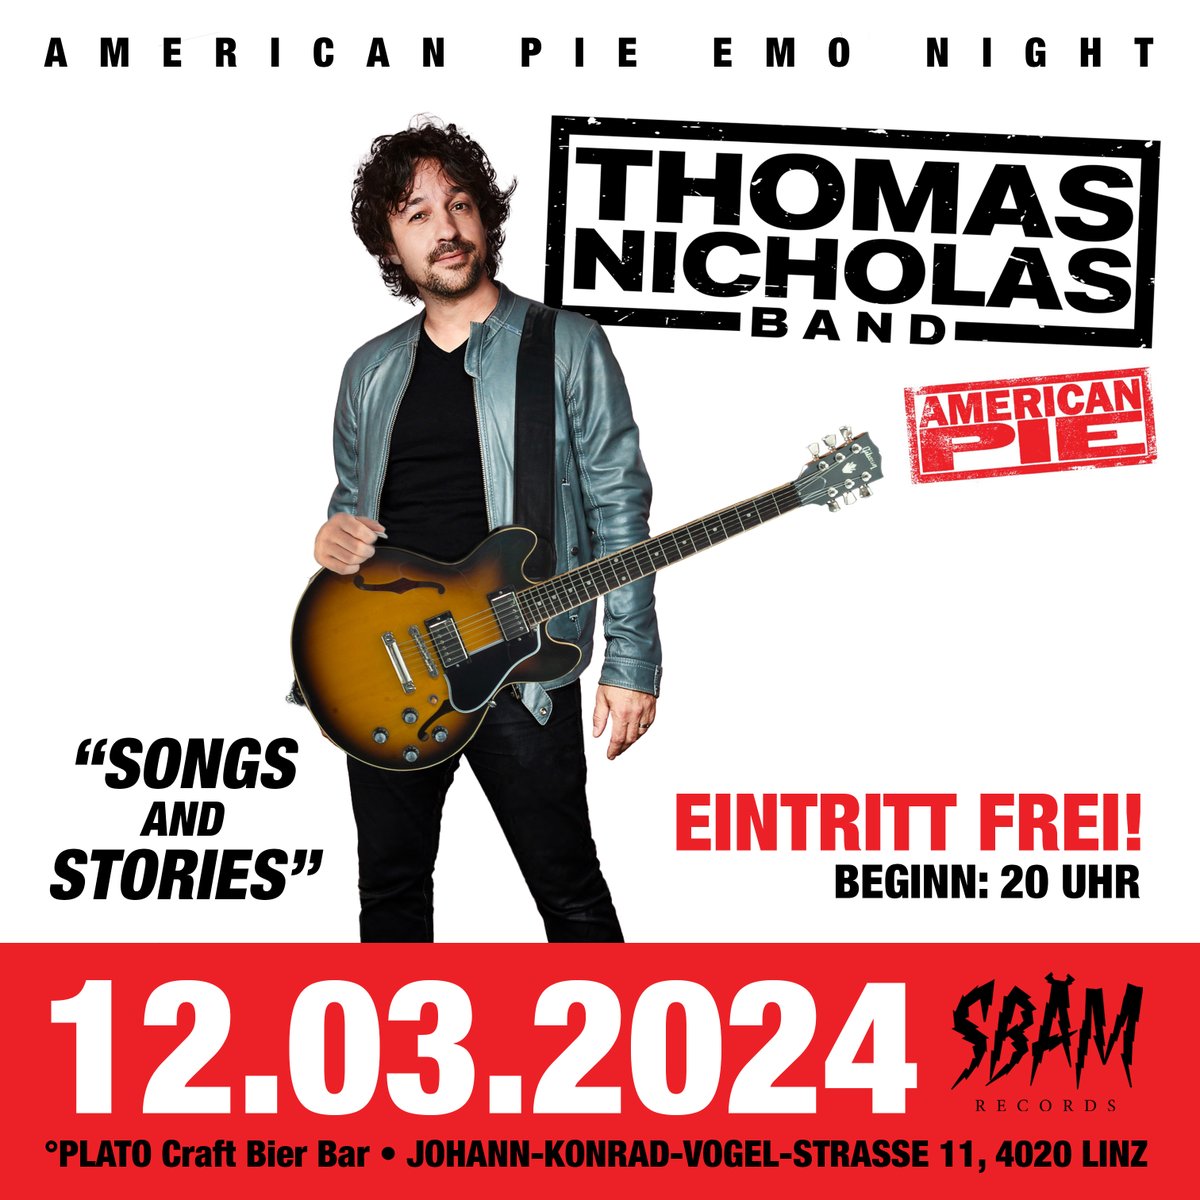 Thomas Nicholas – the dude from American Pie is coming to Linz, Austria! And he’s doing an acoustic set & tells stories about the movie we all loved. The show is FOR FREE! Let’s have some fun and probably – nah of course, getting drunk!🤘 #thomasnicholas #americanpie #sbam